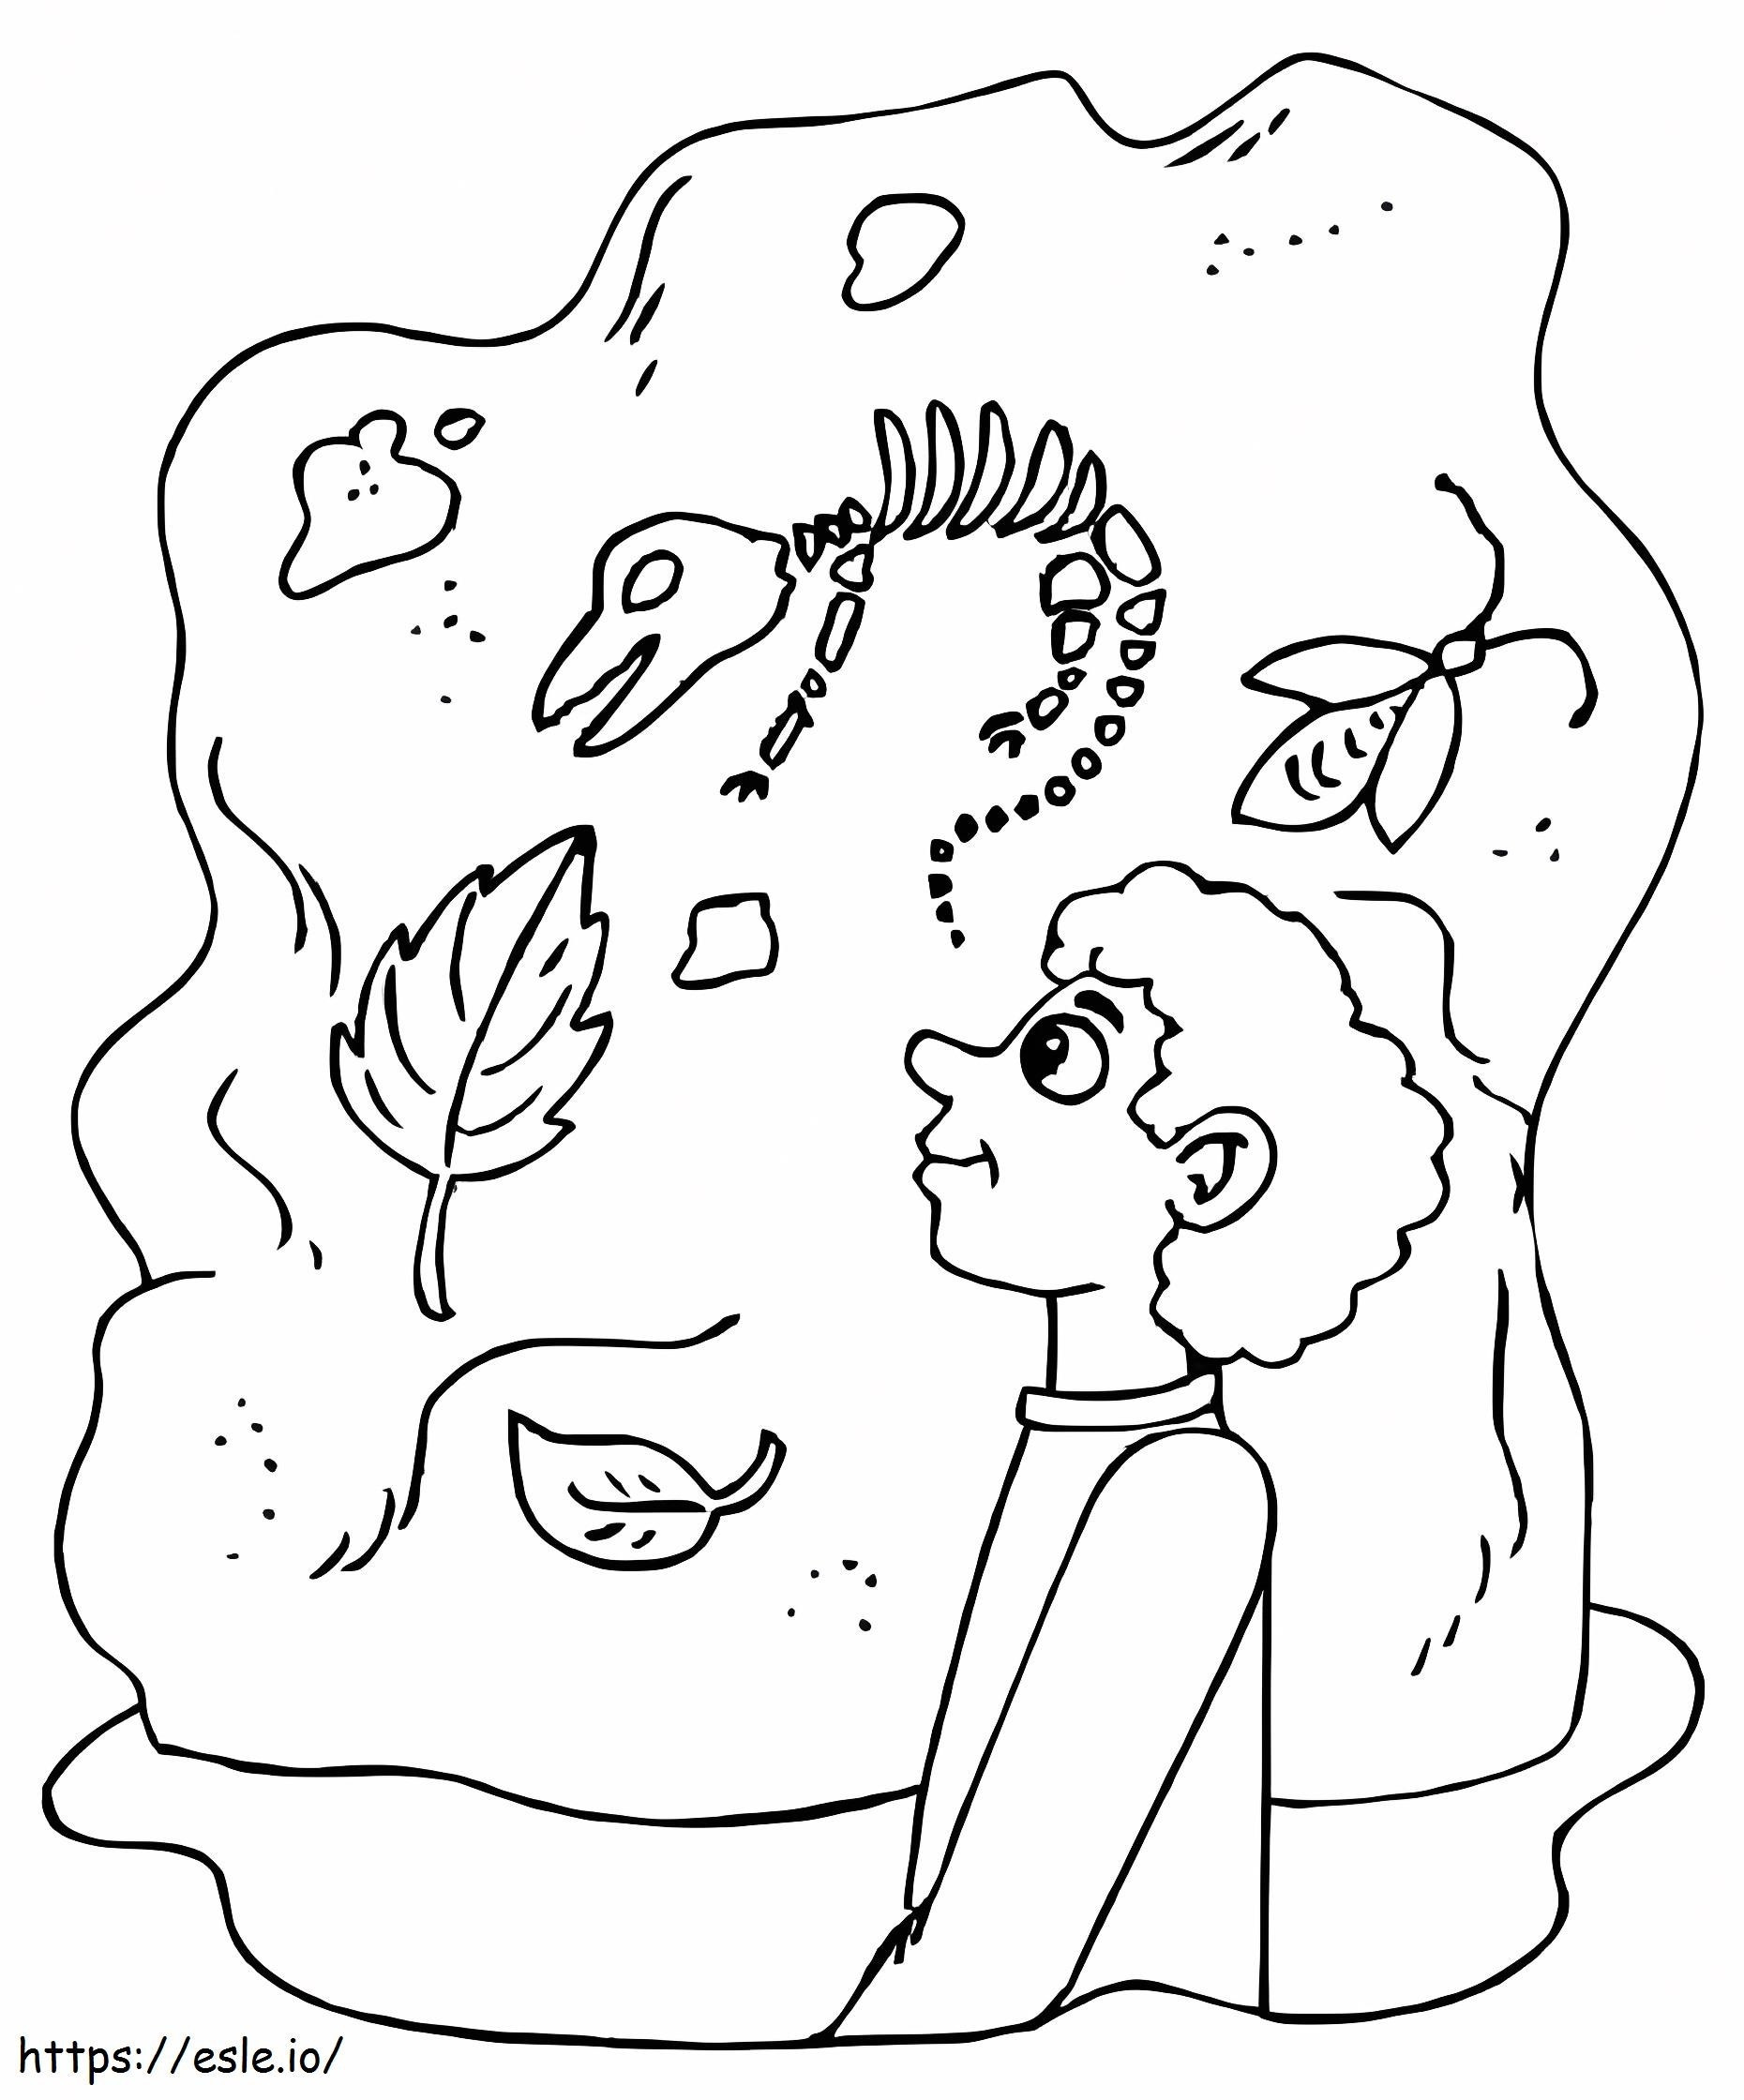 Dinosaurs Museum coloring page